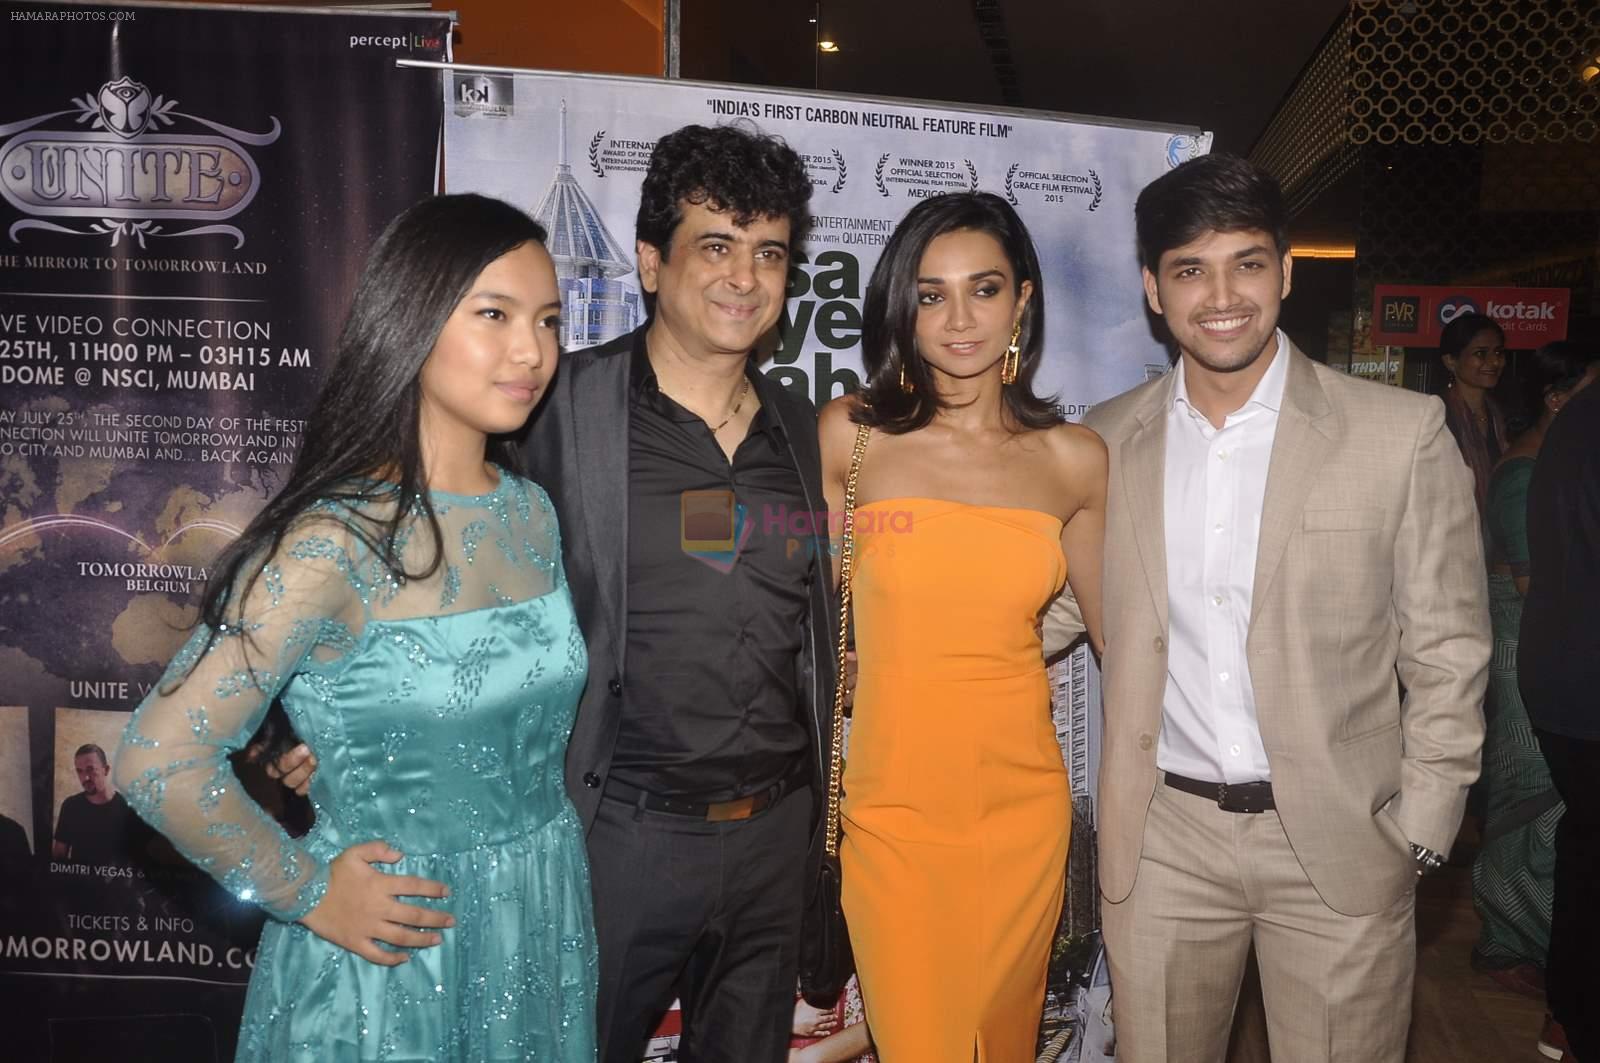 Kymsleen Kholie, Ira Dubey at the Premiere of Aisa Yeh Jahaan in PVR on 23rd July 2015